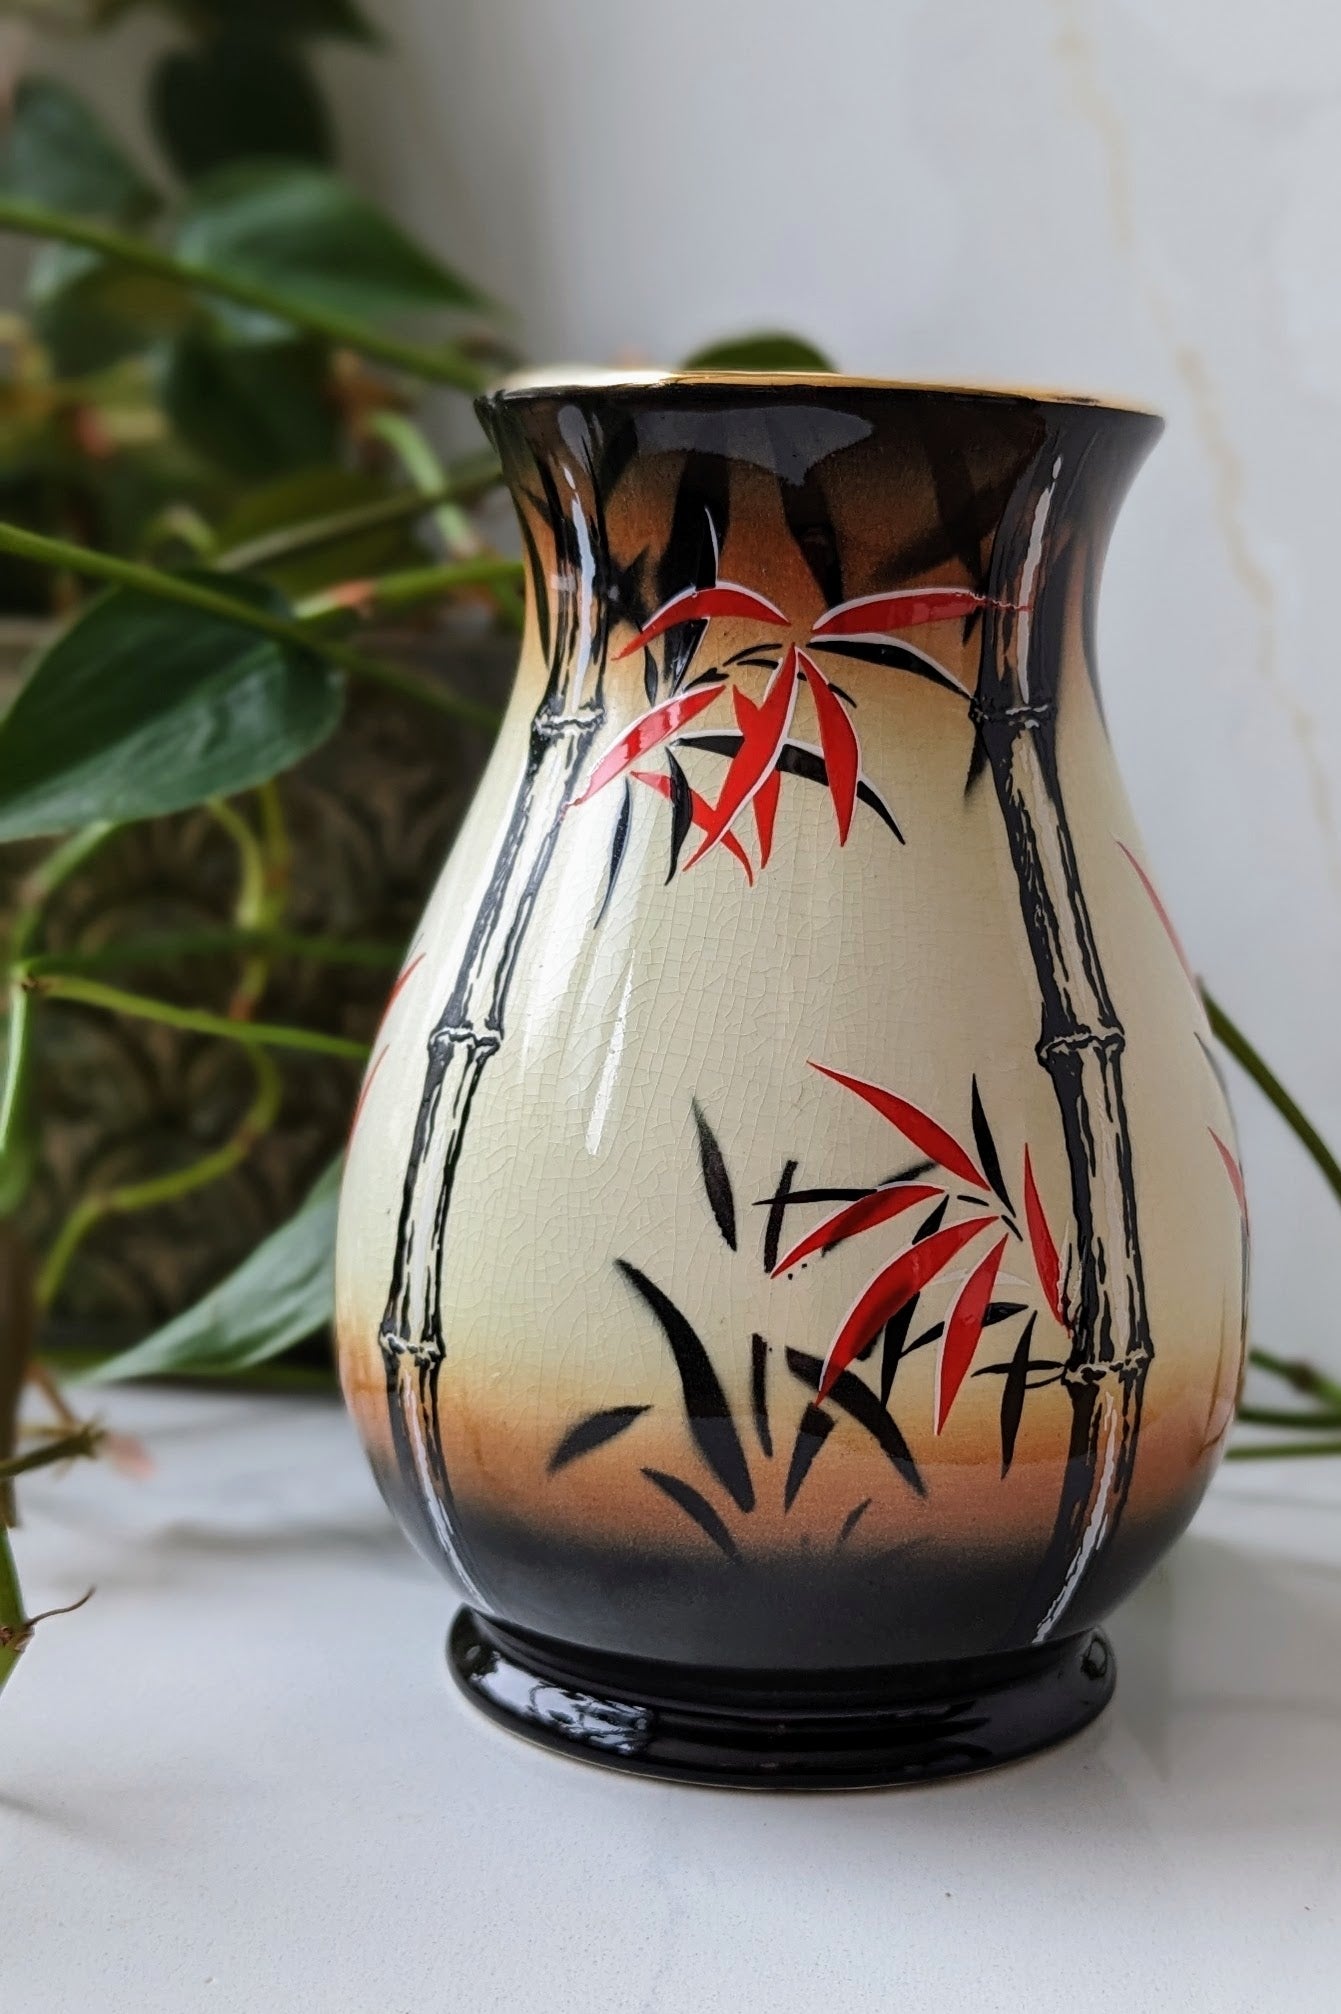 printed bamboo and leaf pattern on mid century vase